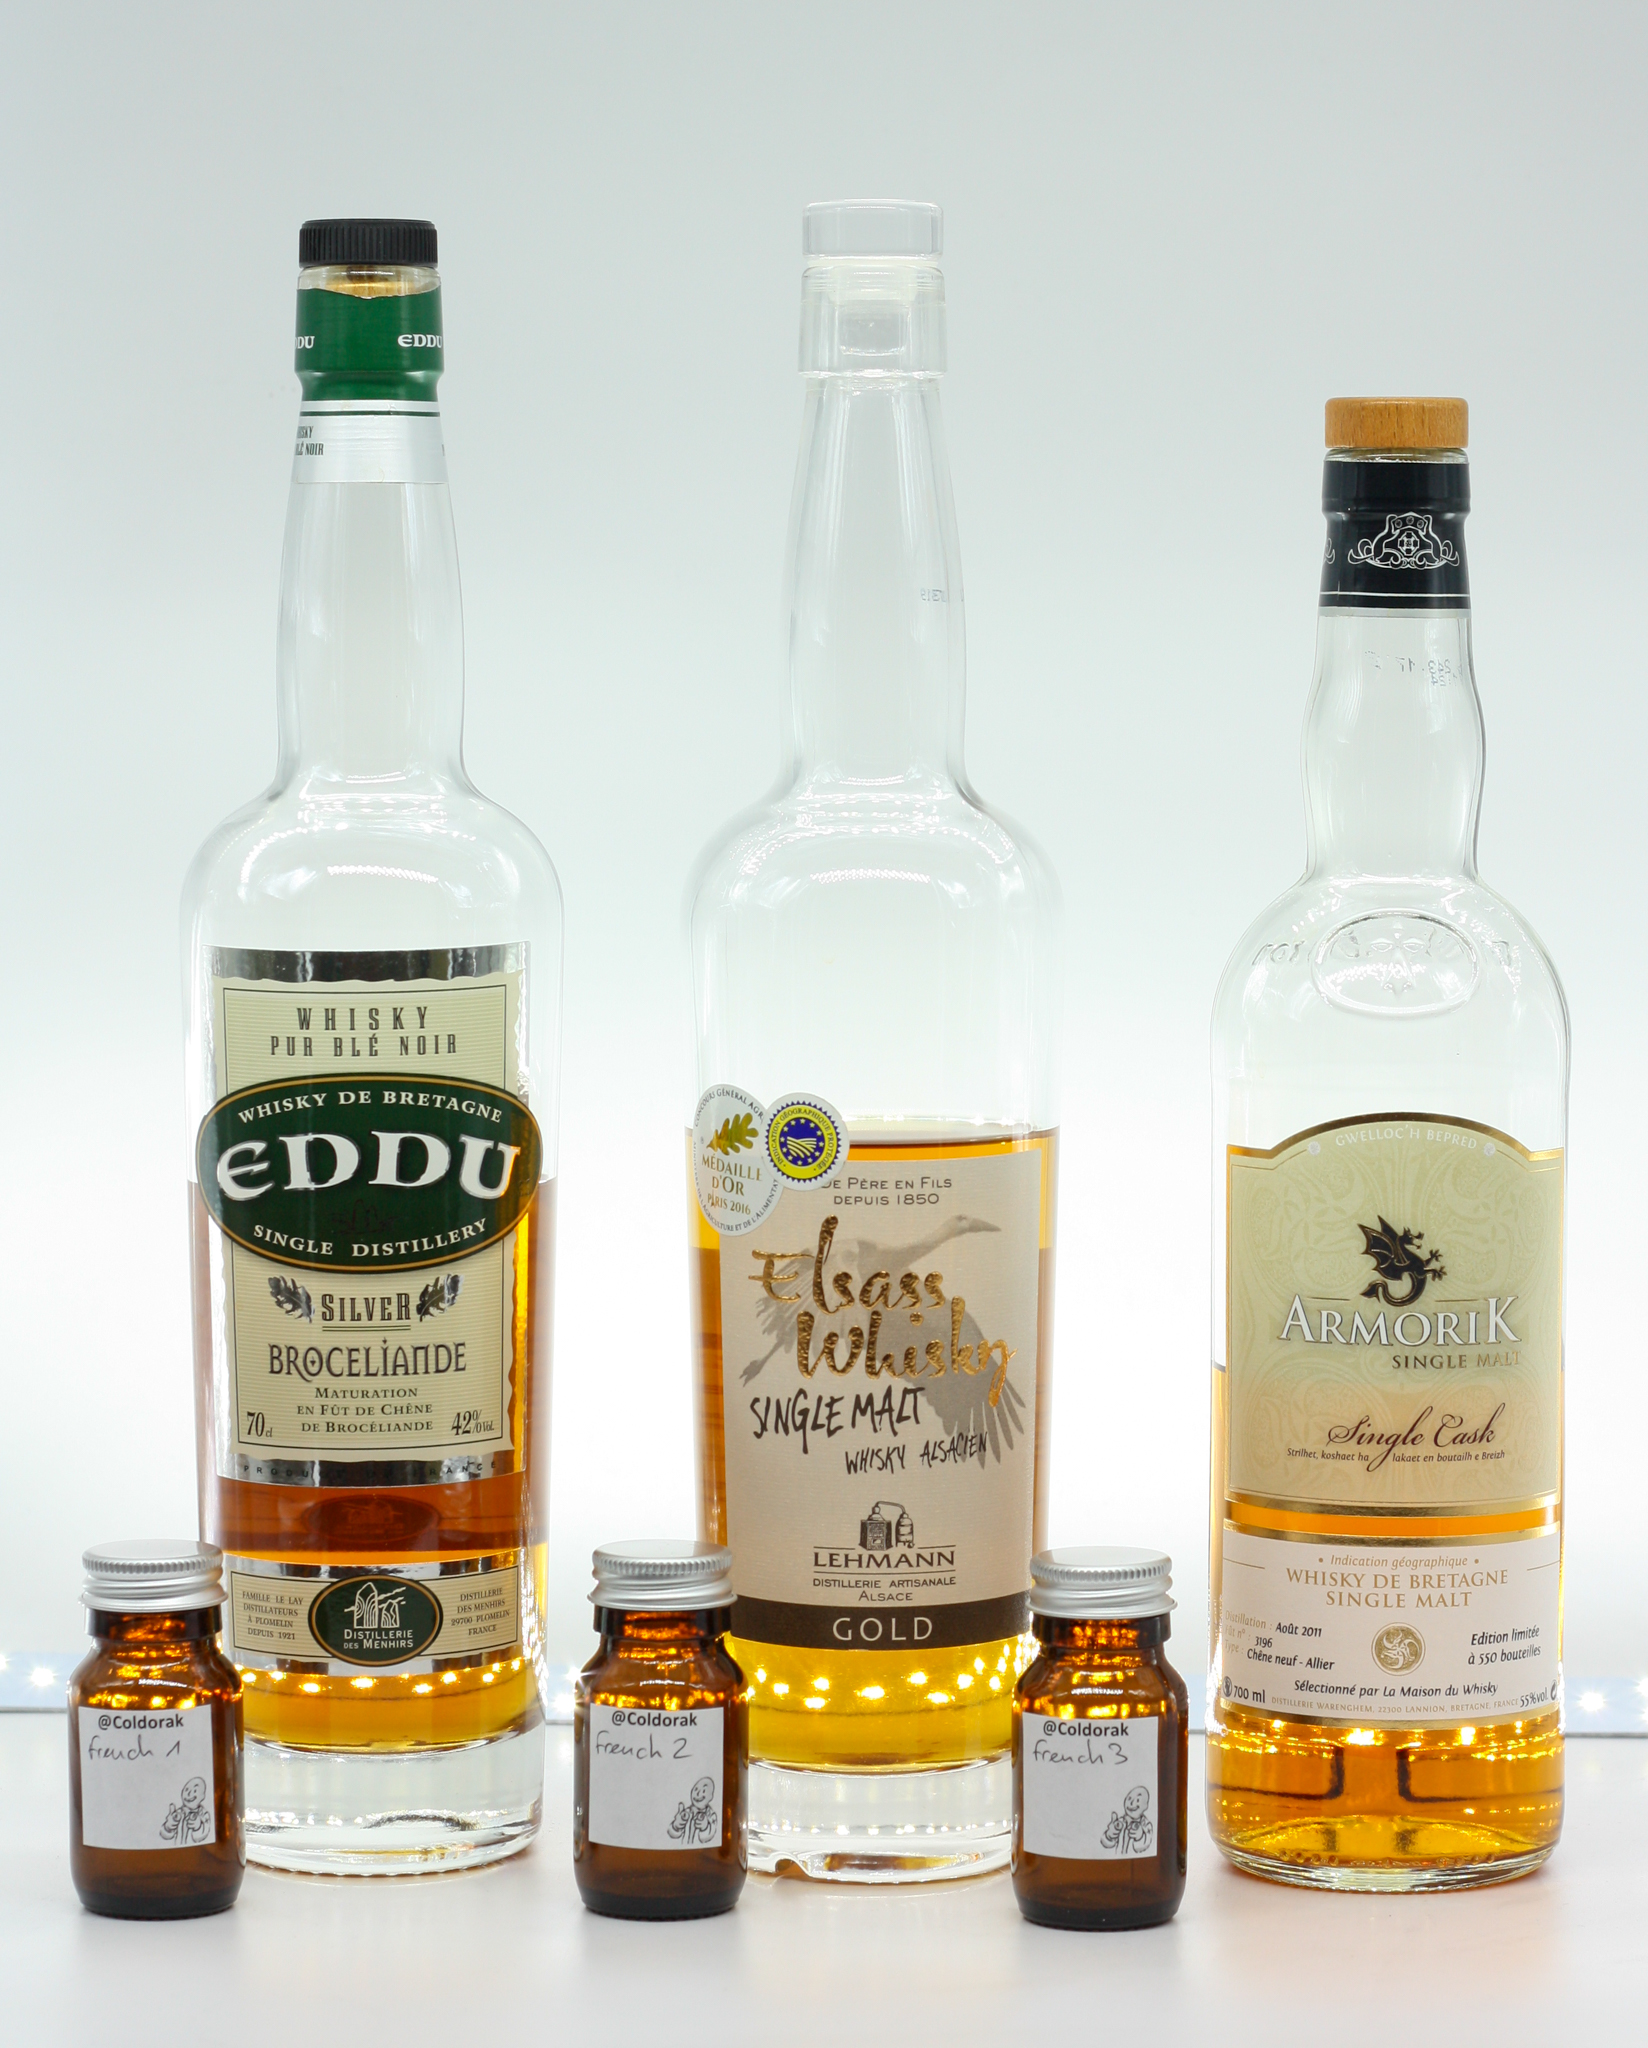 The French whisky lineup revealed